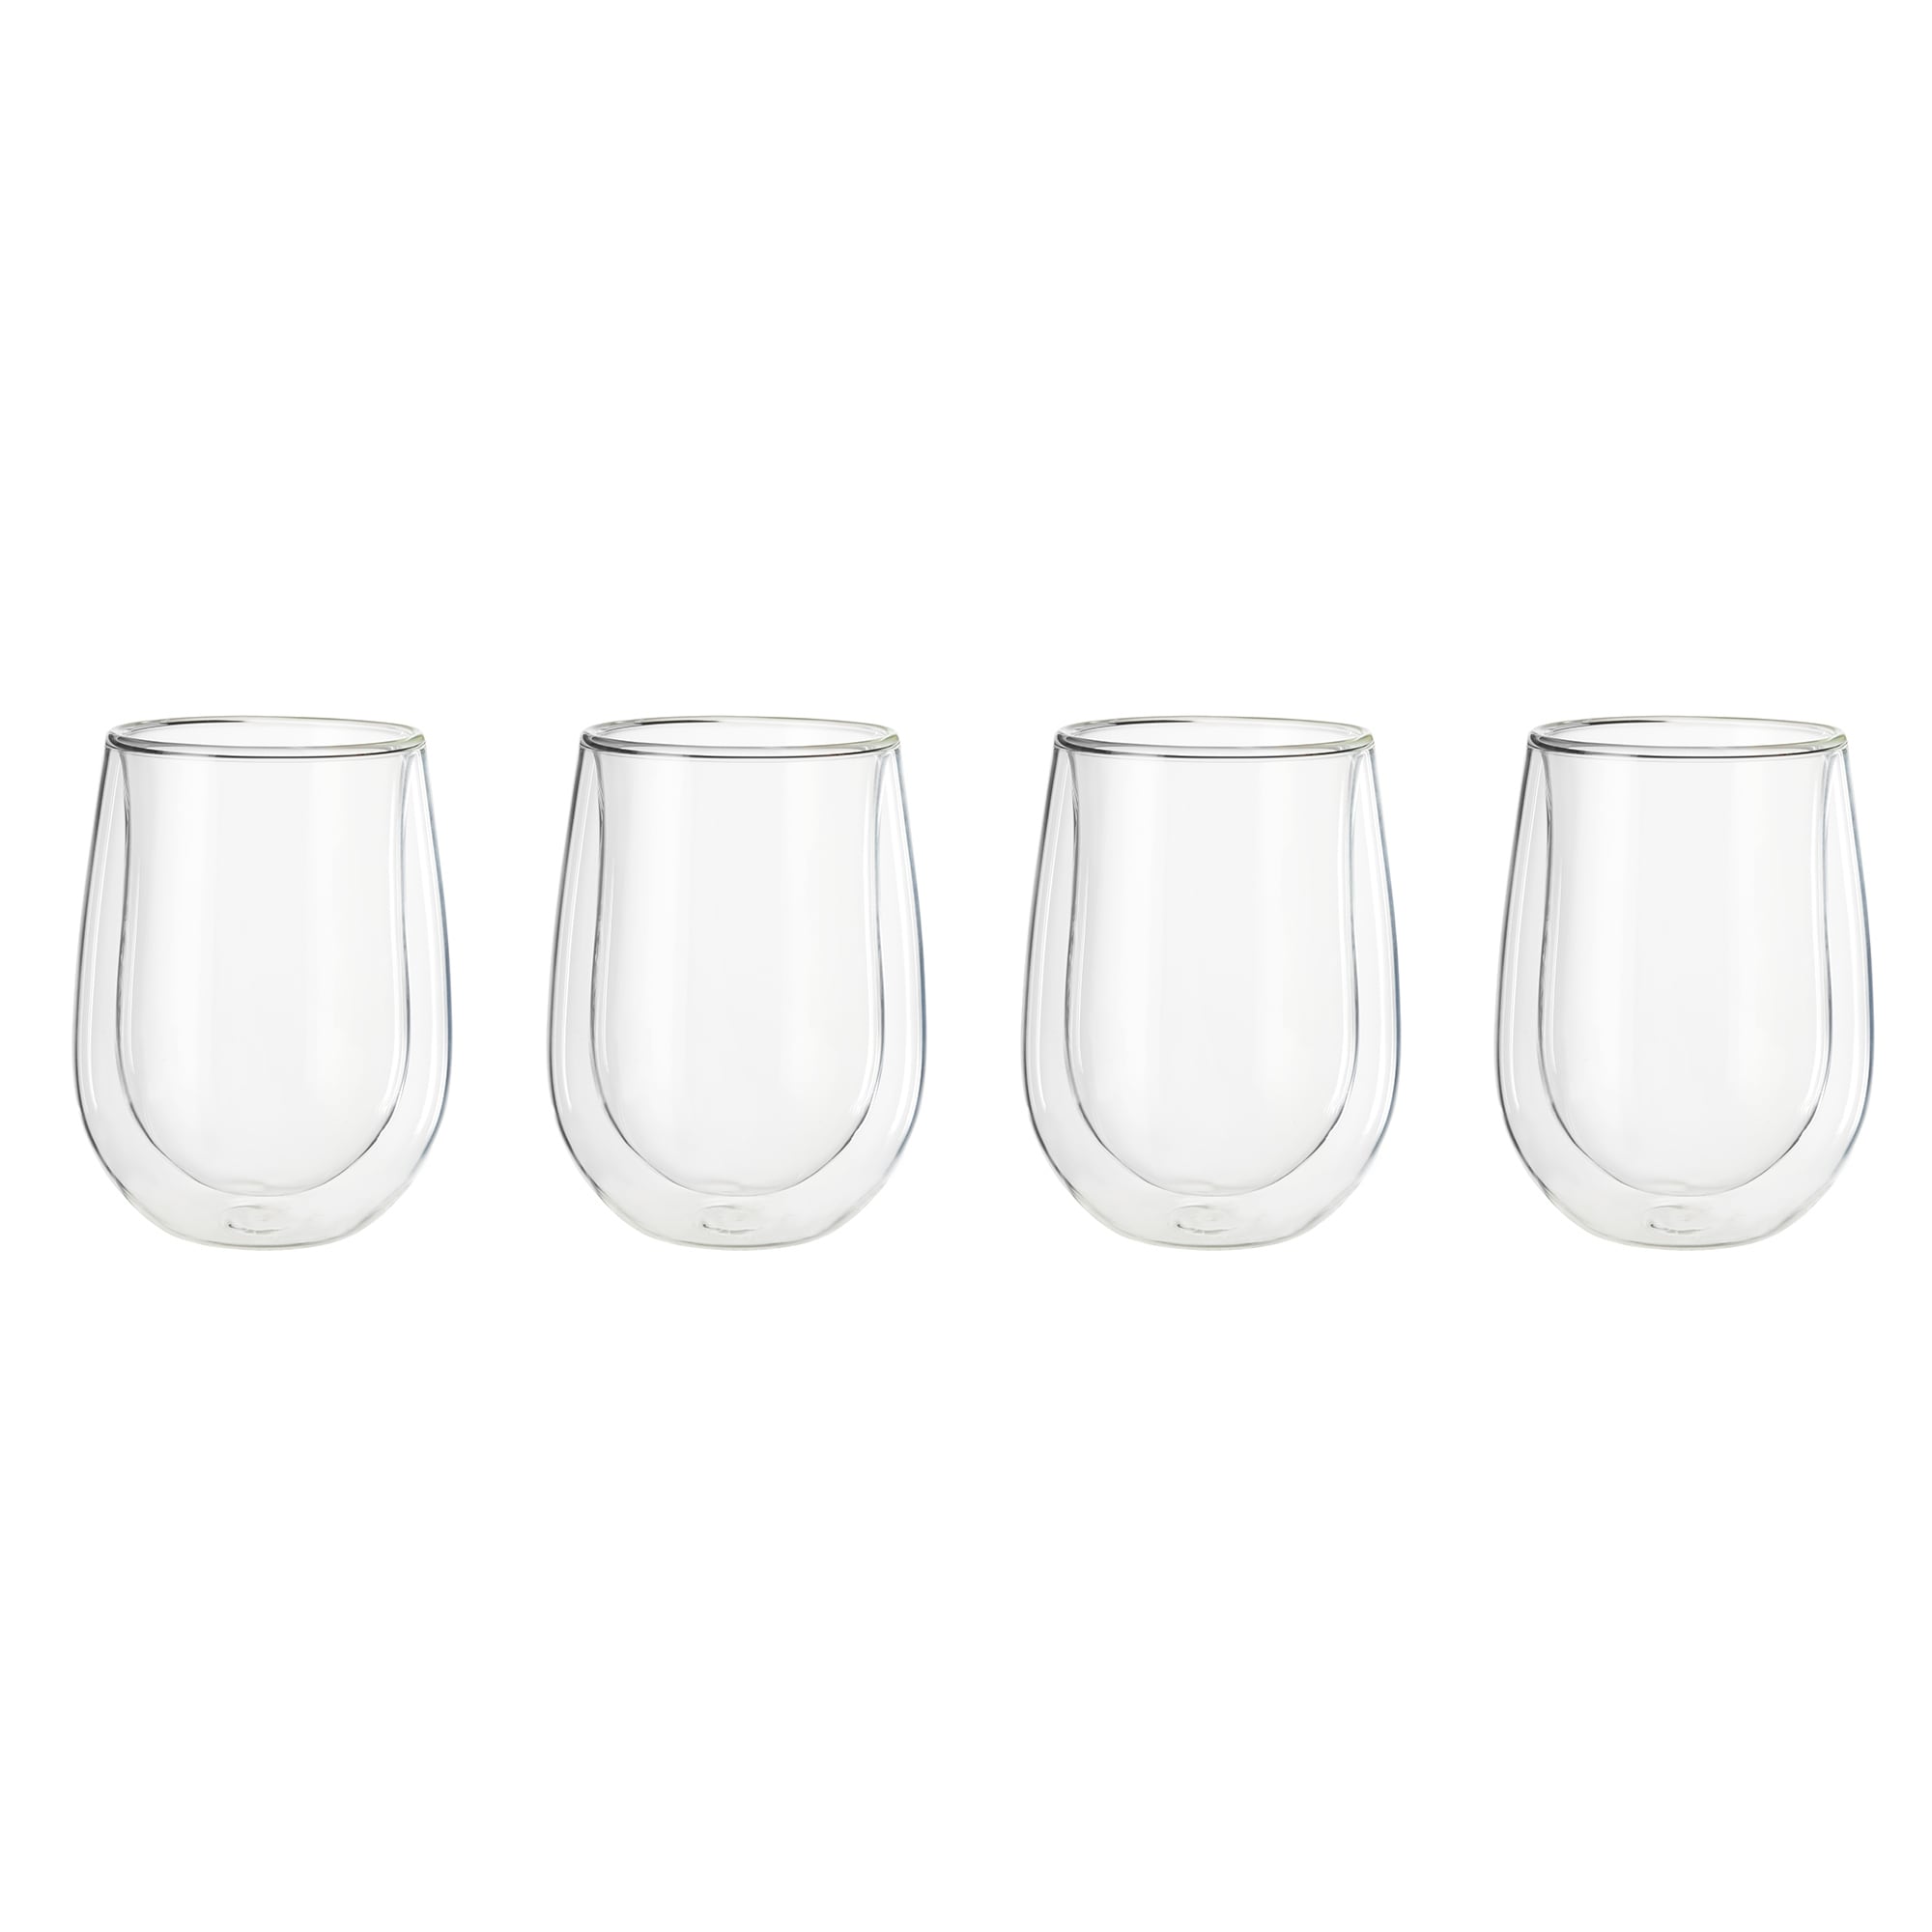 Henckels Cafe Roma 2-pc Espresso glass set, Double wall